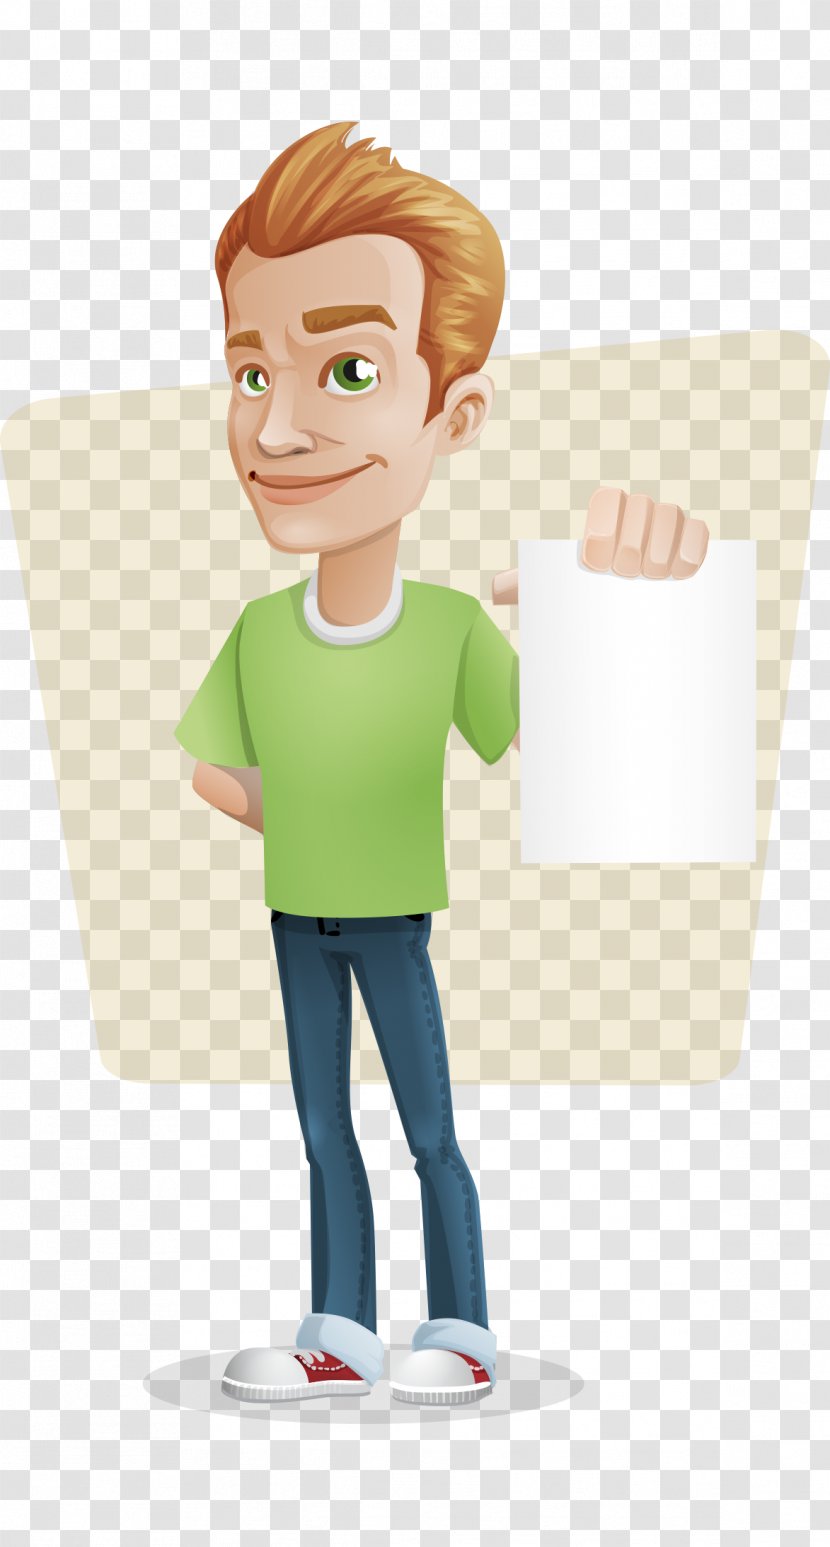 Female Euclidean Vector Illustration - Hand-painted Cartoon Casual Man Holding The Paper Transparent PNG